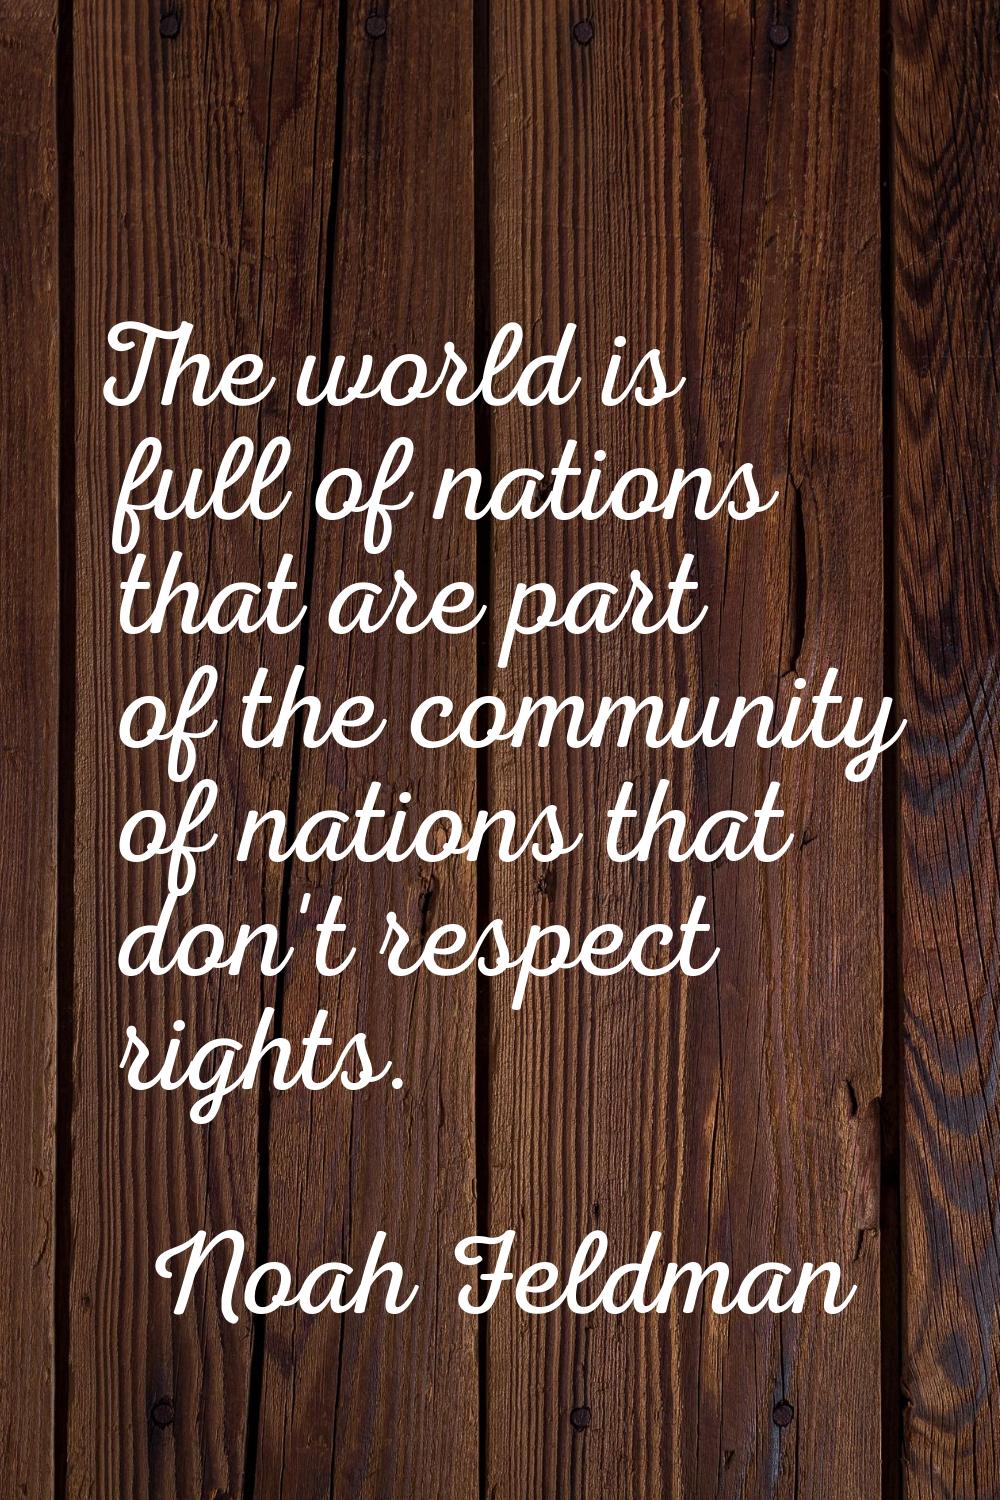 The world is full of nations that are part of the community of nations that don't respect rights.